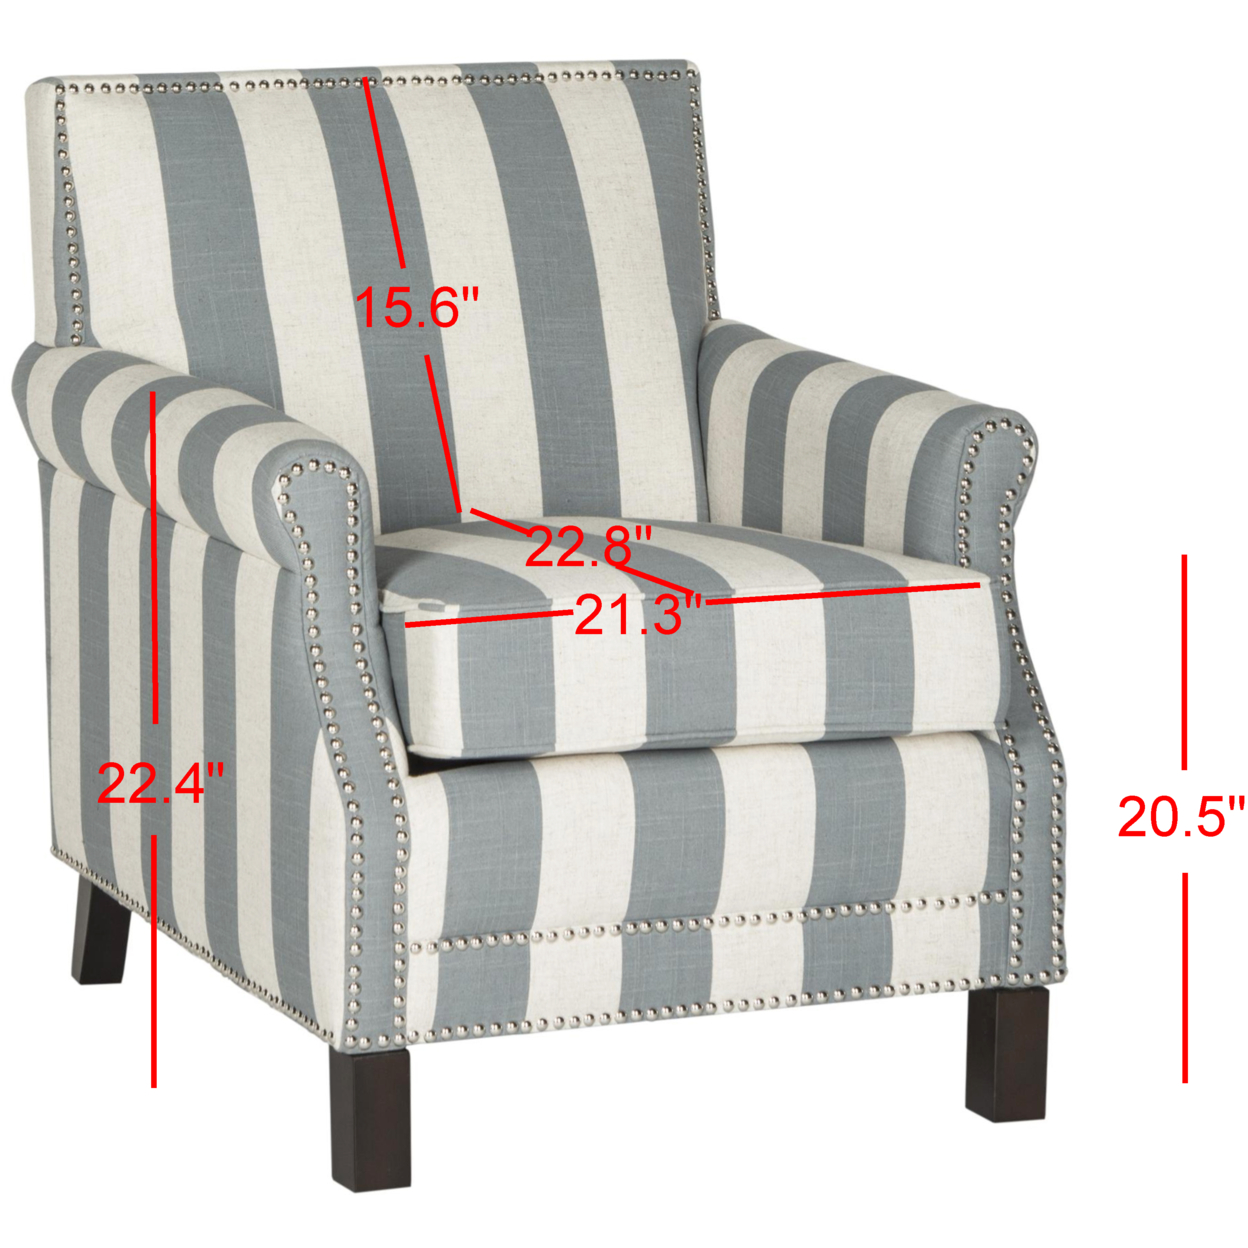 SAFAVIEH Easton Rustic Glam Upholstered Club Chair w/ Nailheads, Grey/White - image 4 of 5